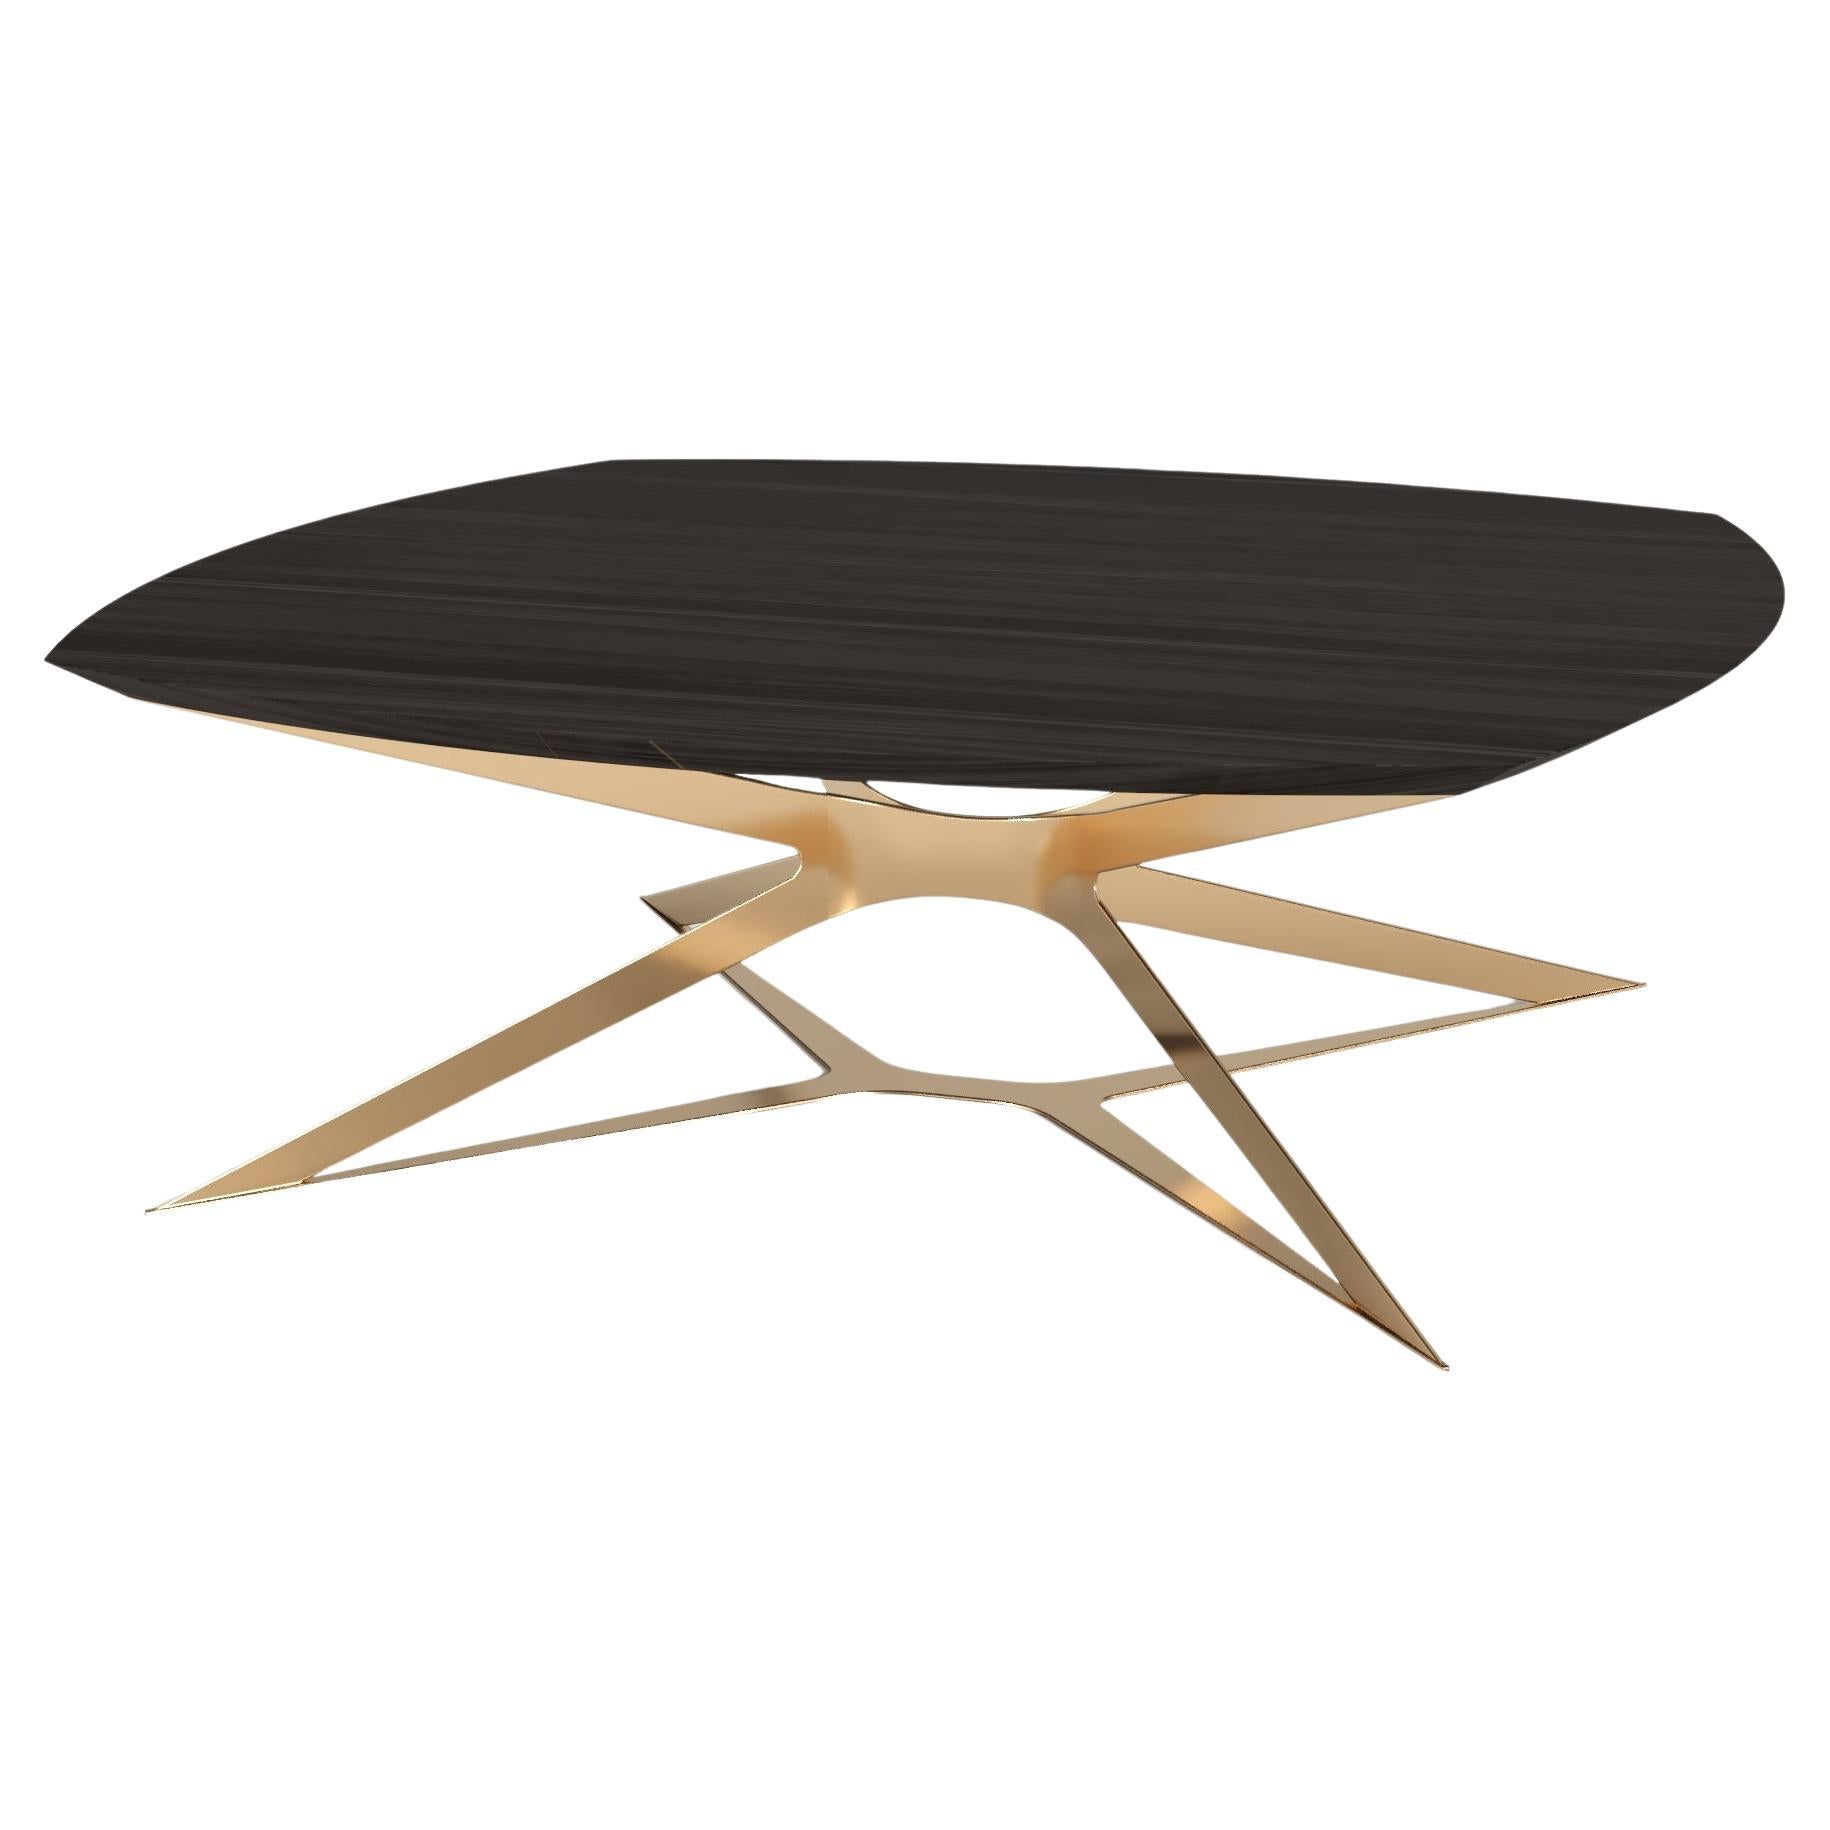 Modern Square Center Coffee Table High-Gloss Black Oak Wood Gold Lacquered Steel